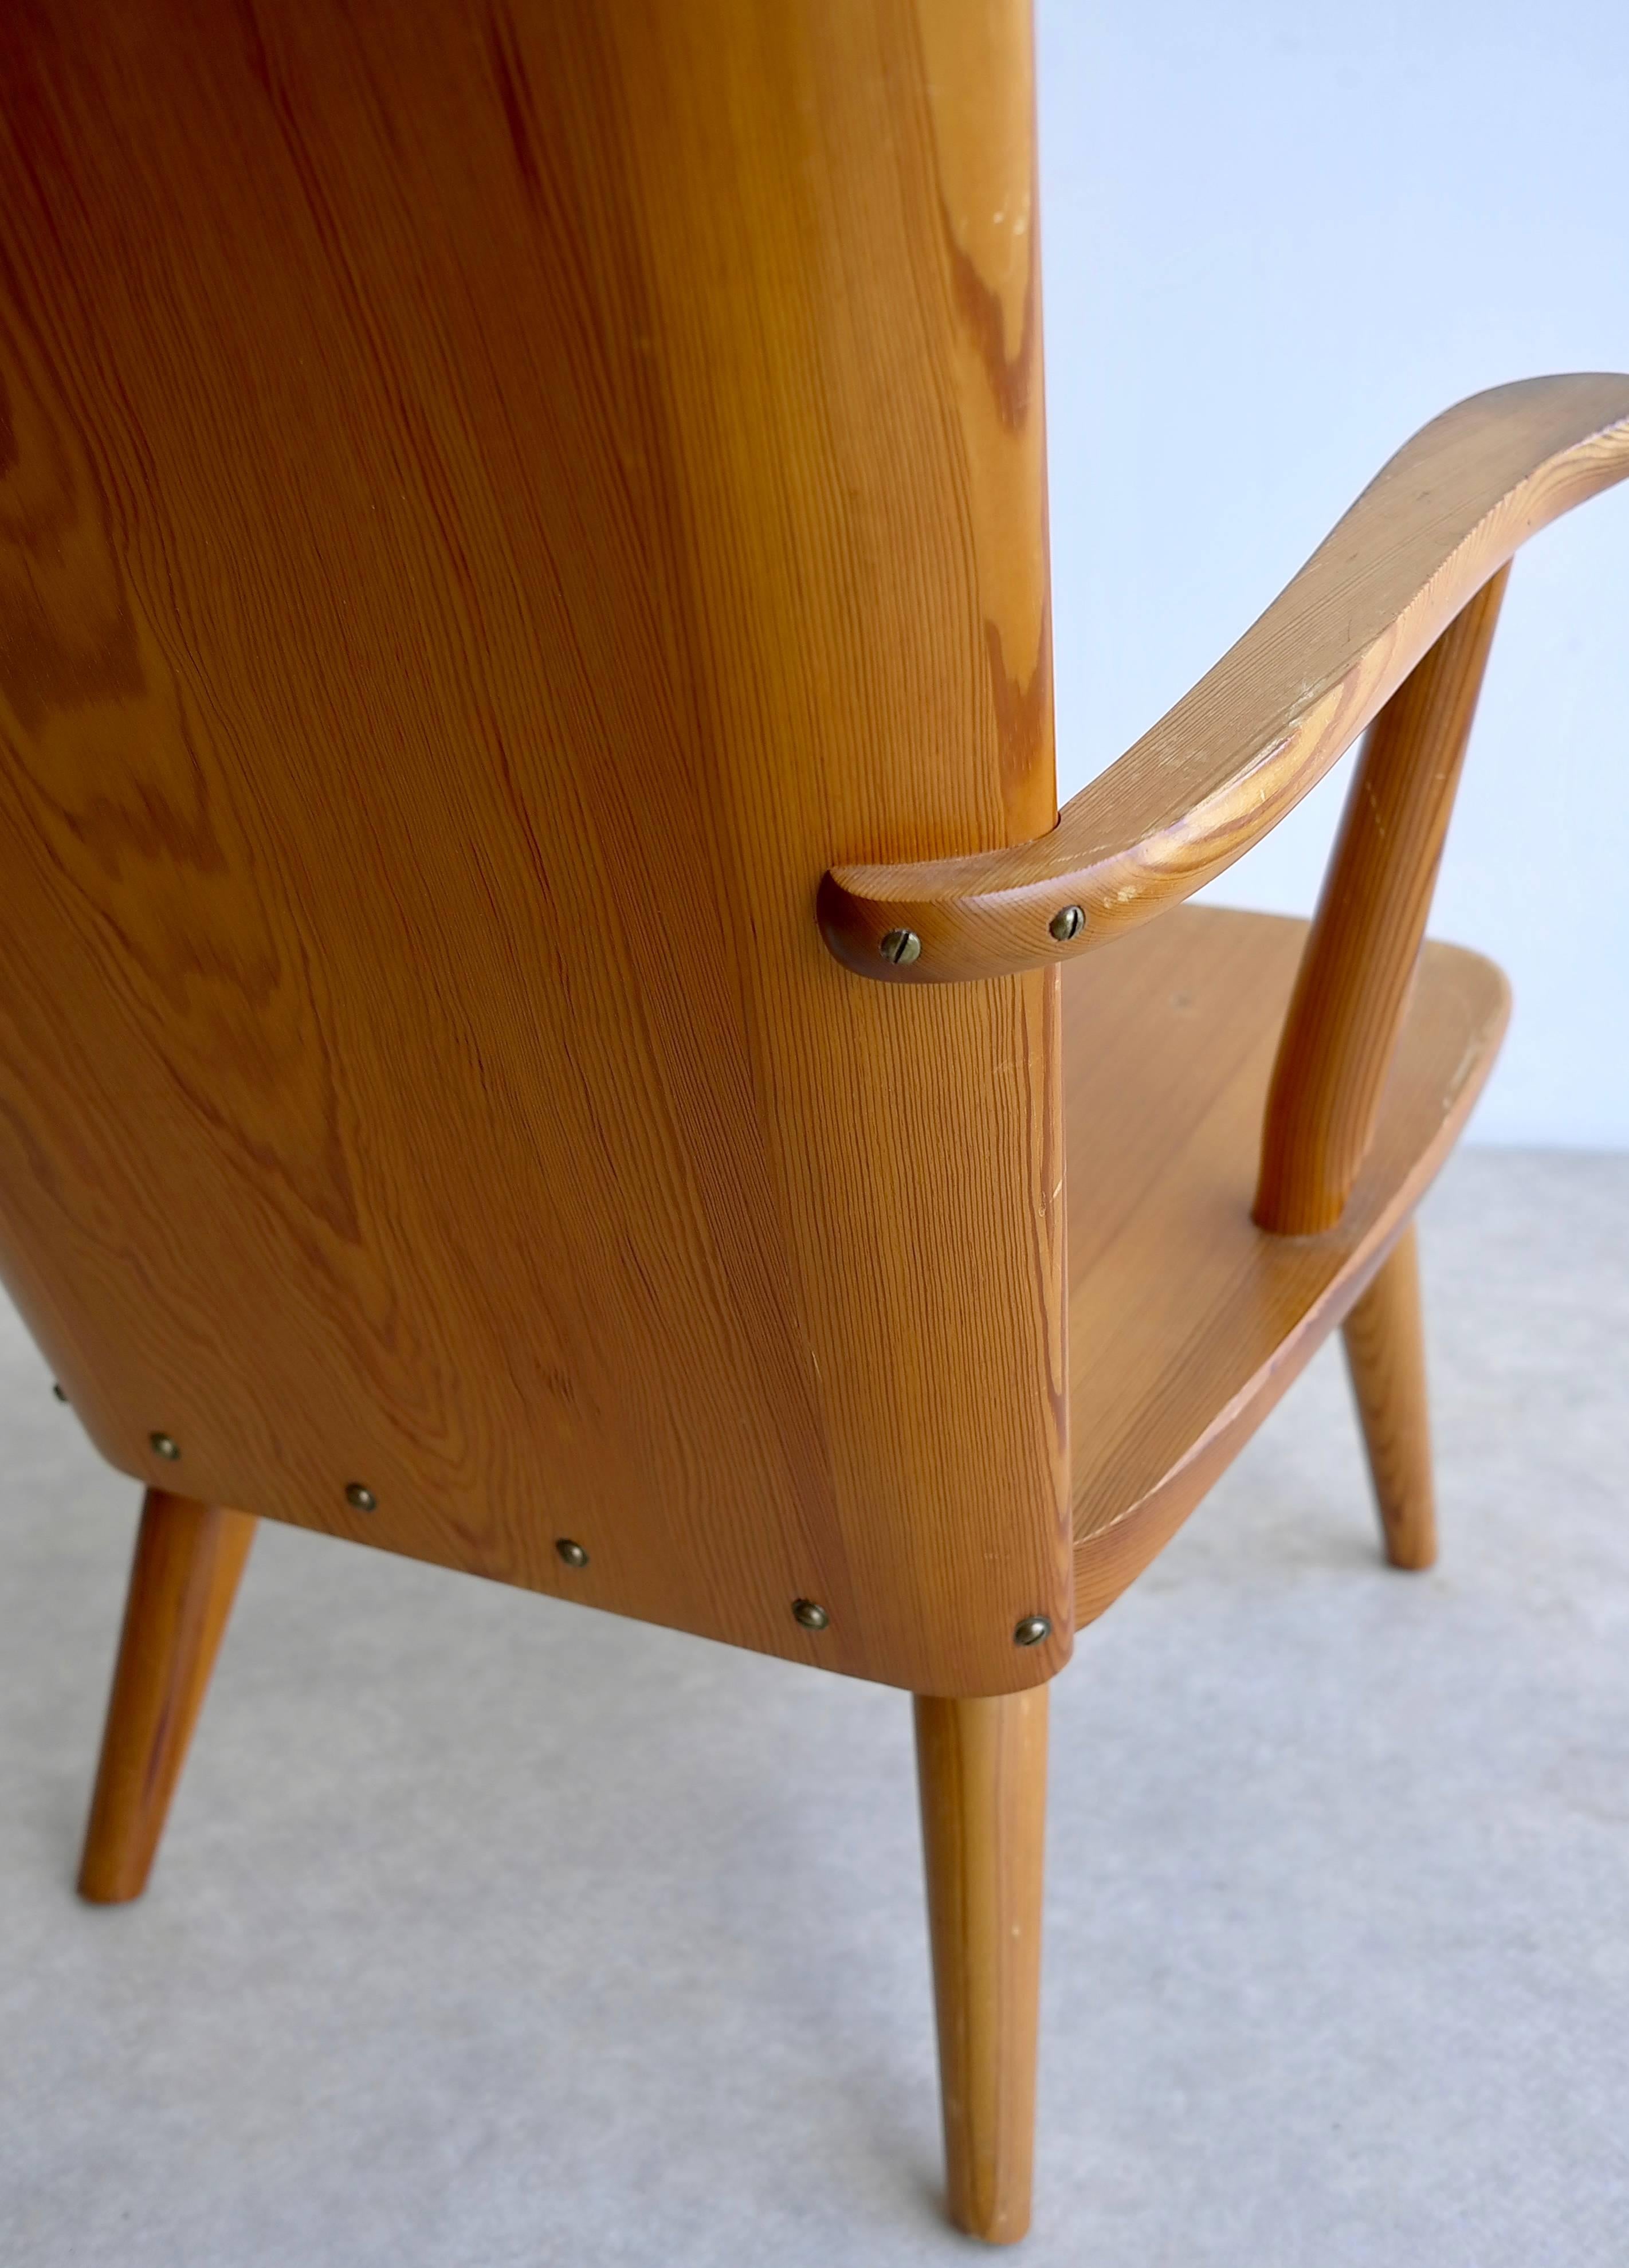 Mid-20th Century Rare Swedish Armchair in Pine by Goran Malmvall voor Svensk Fur, 1940s For Sale